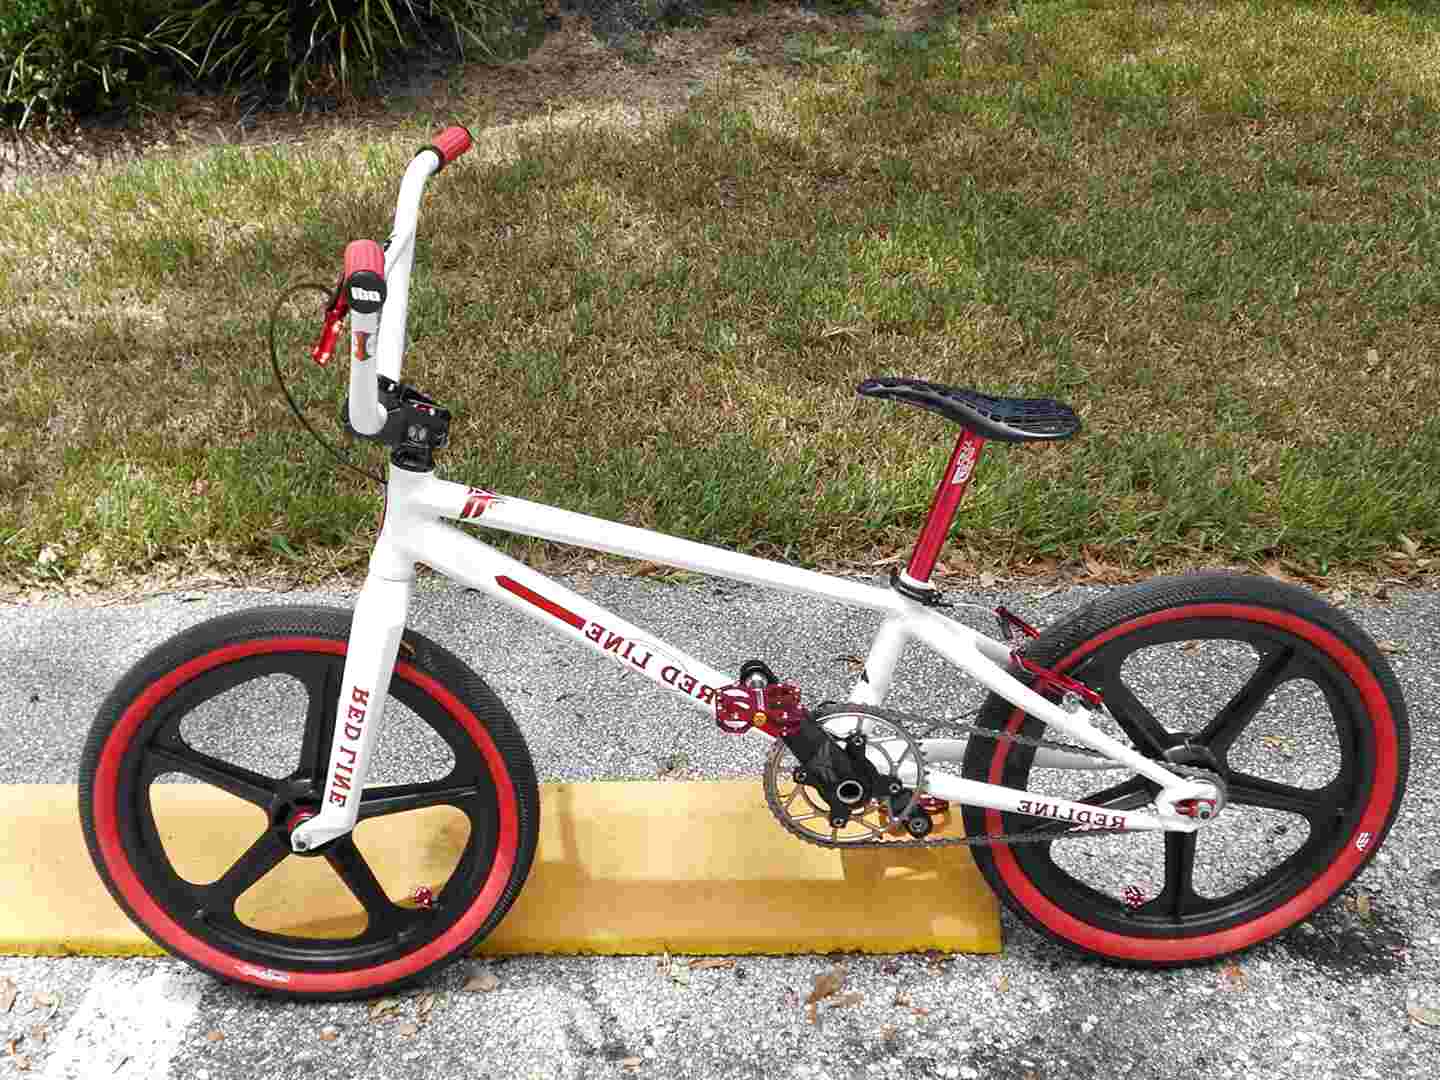 small redline bicycles used